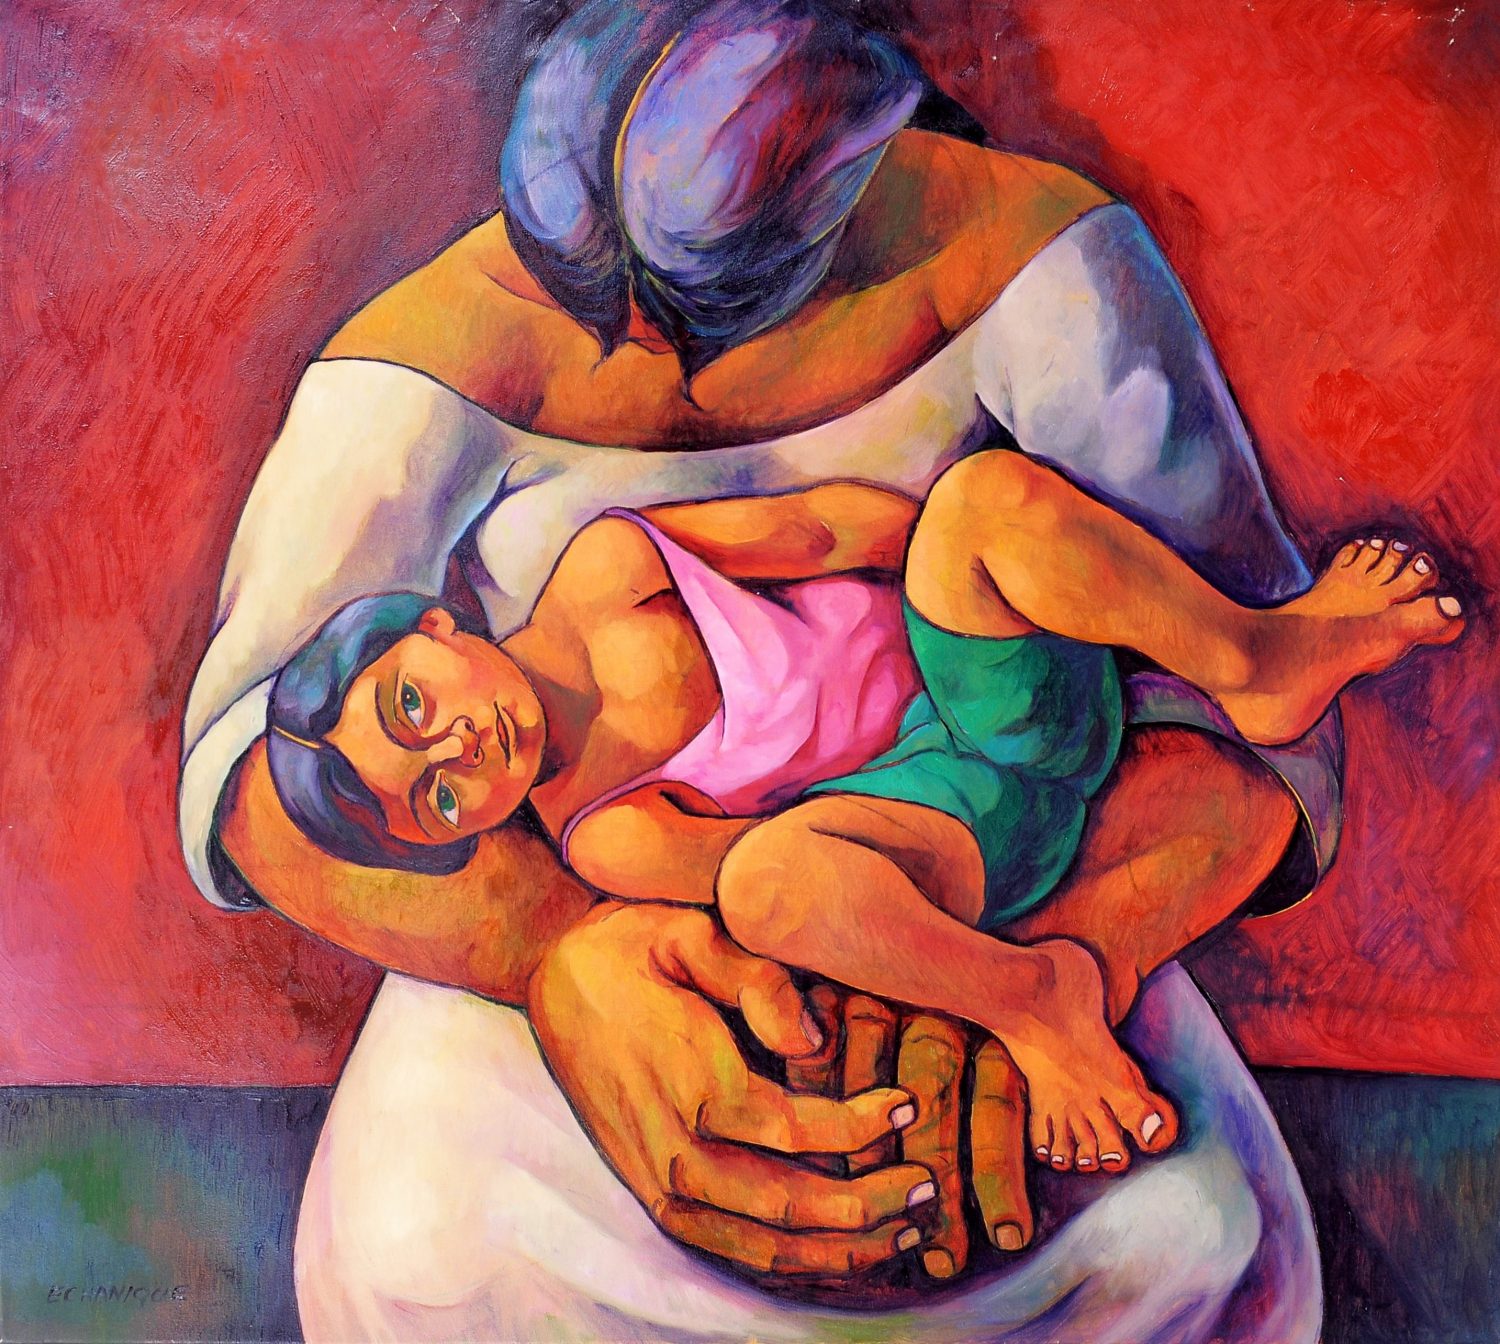 thumbnail of Untitled work by Ecuadorian artist Robin Echanique. medium: oil on canvas. Dimensions: 39 x 35 inches. date: unknown